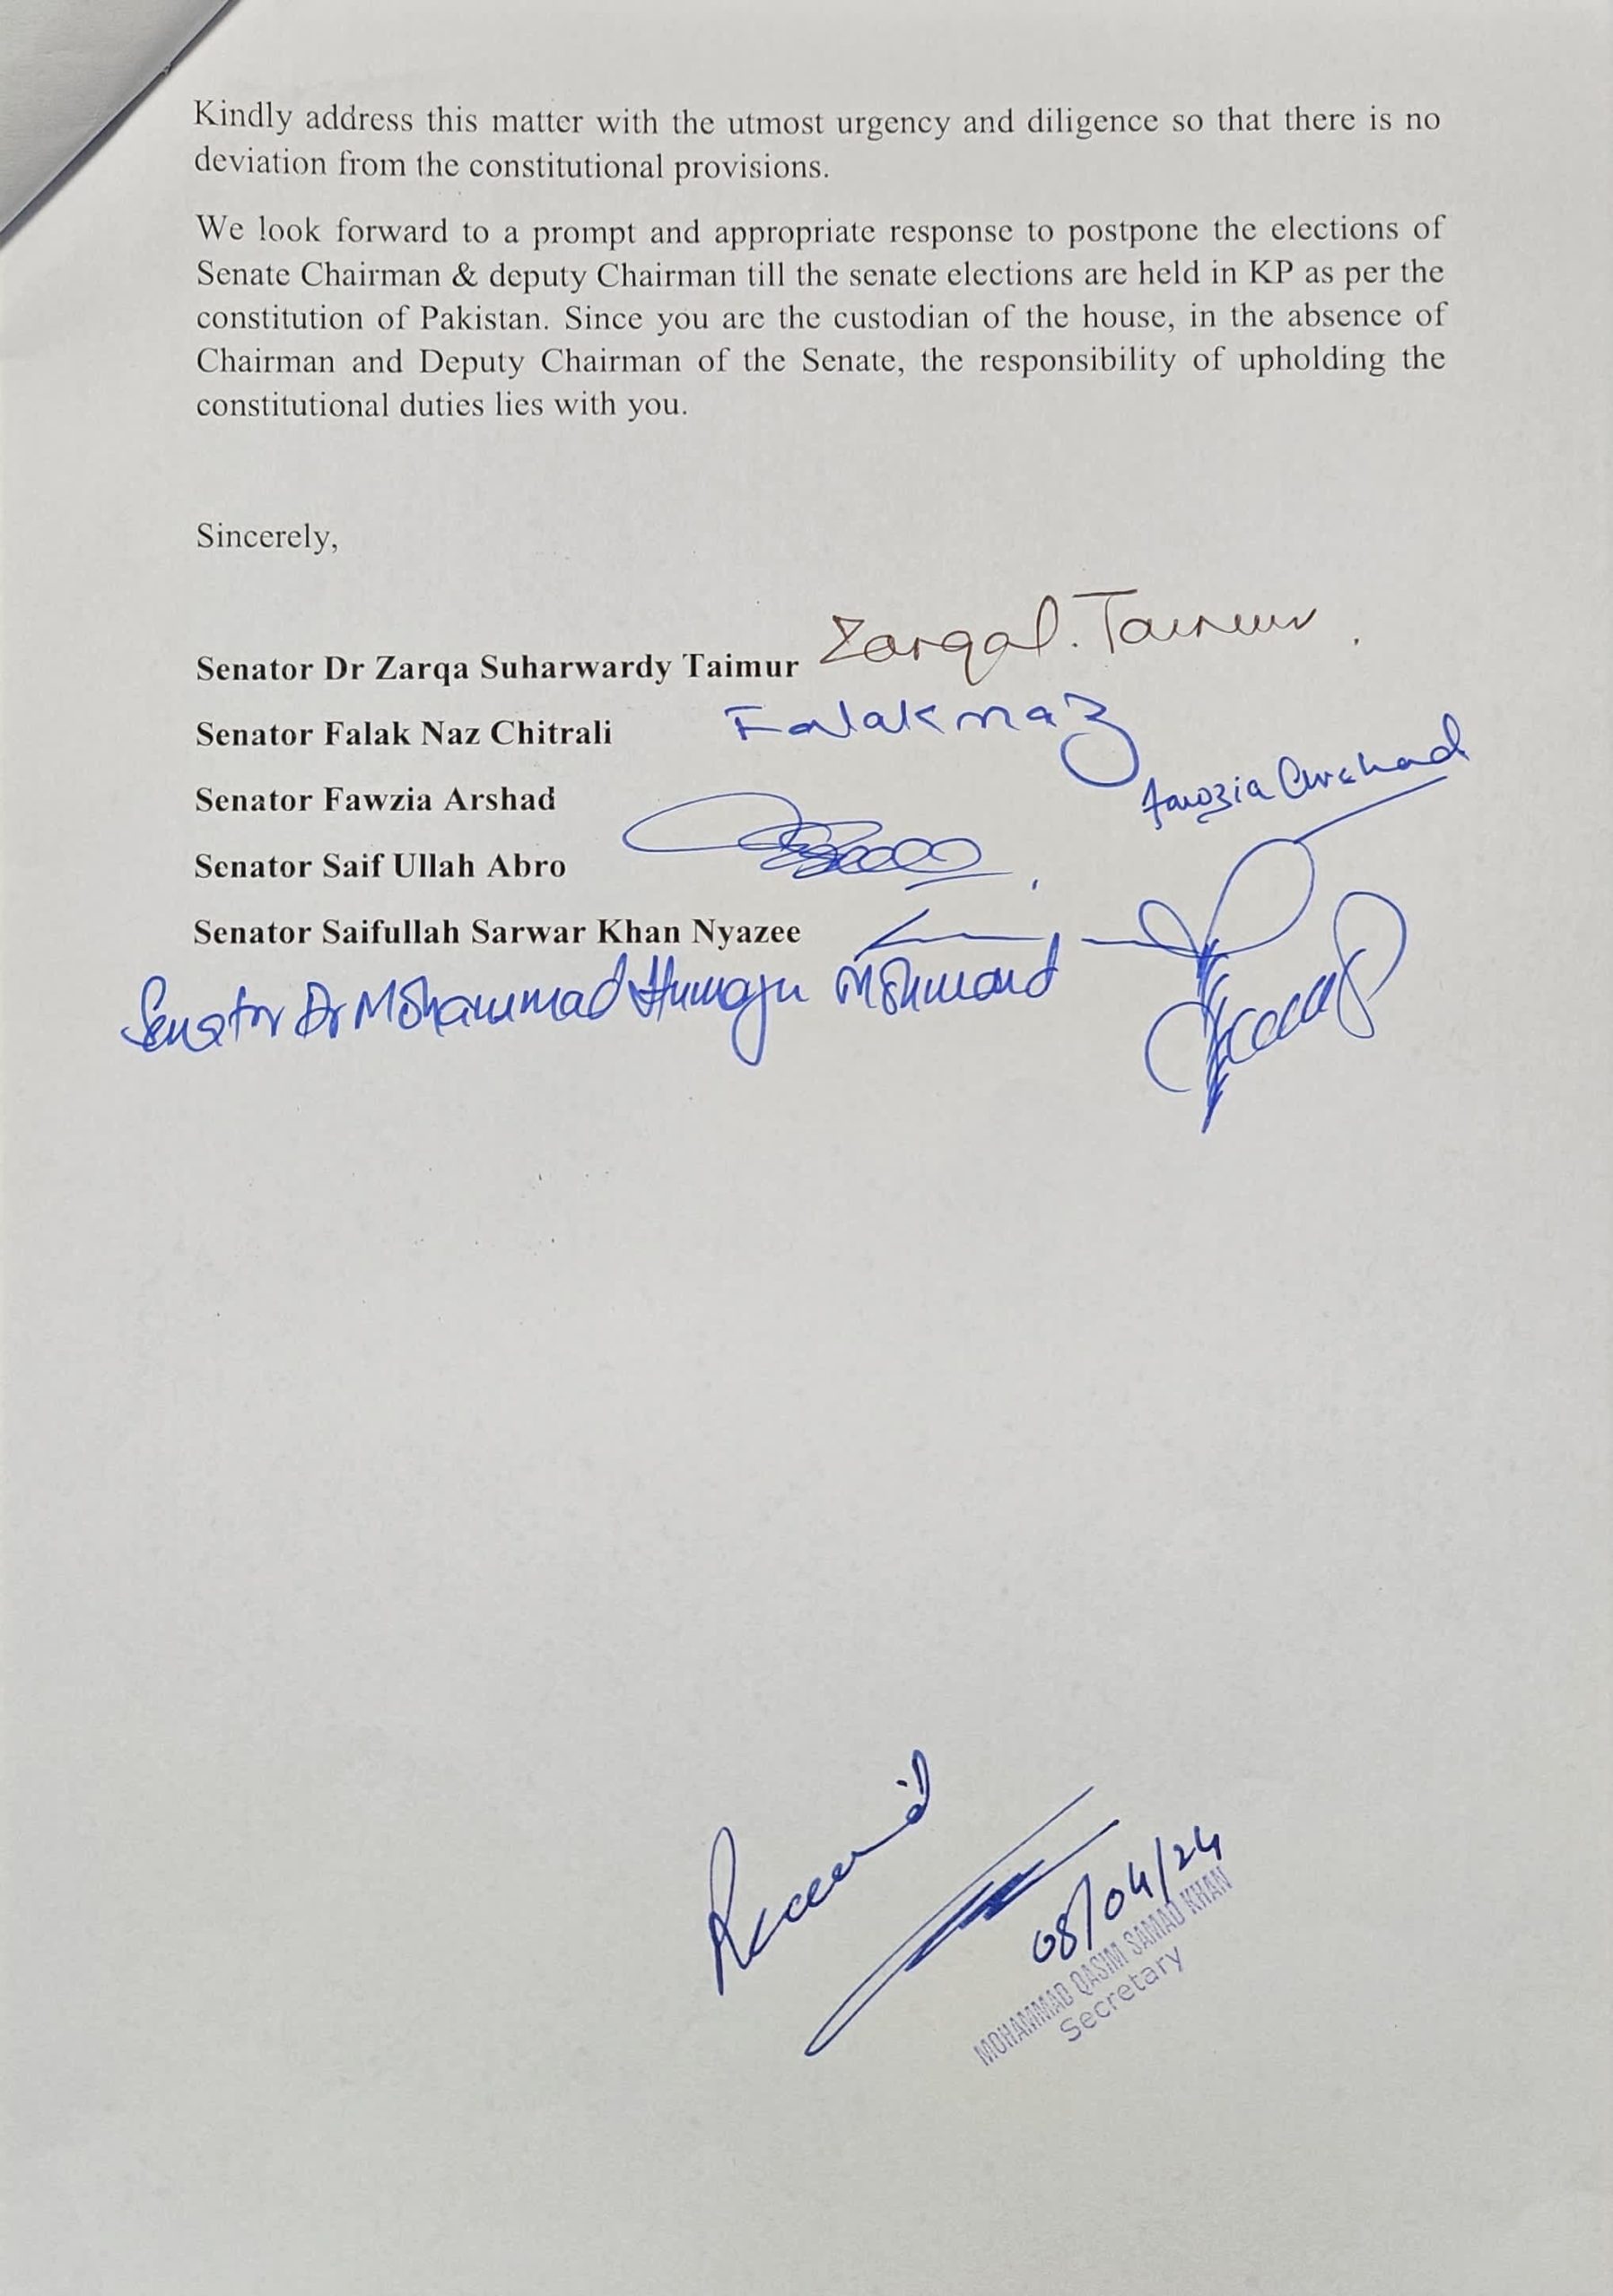 PTI contests the IHC elections for Senate chairman and deputy chairman